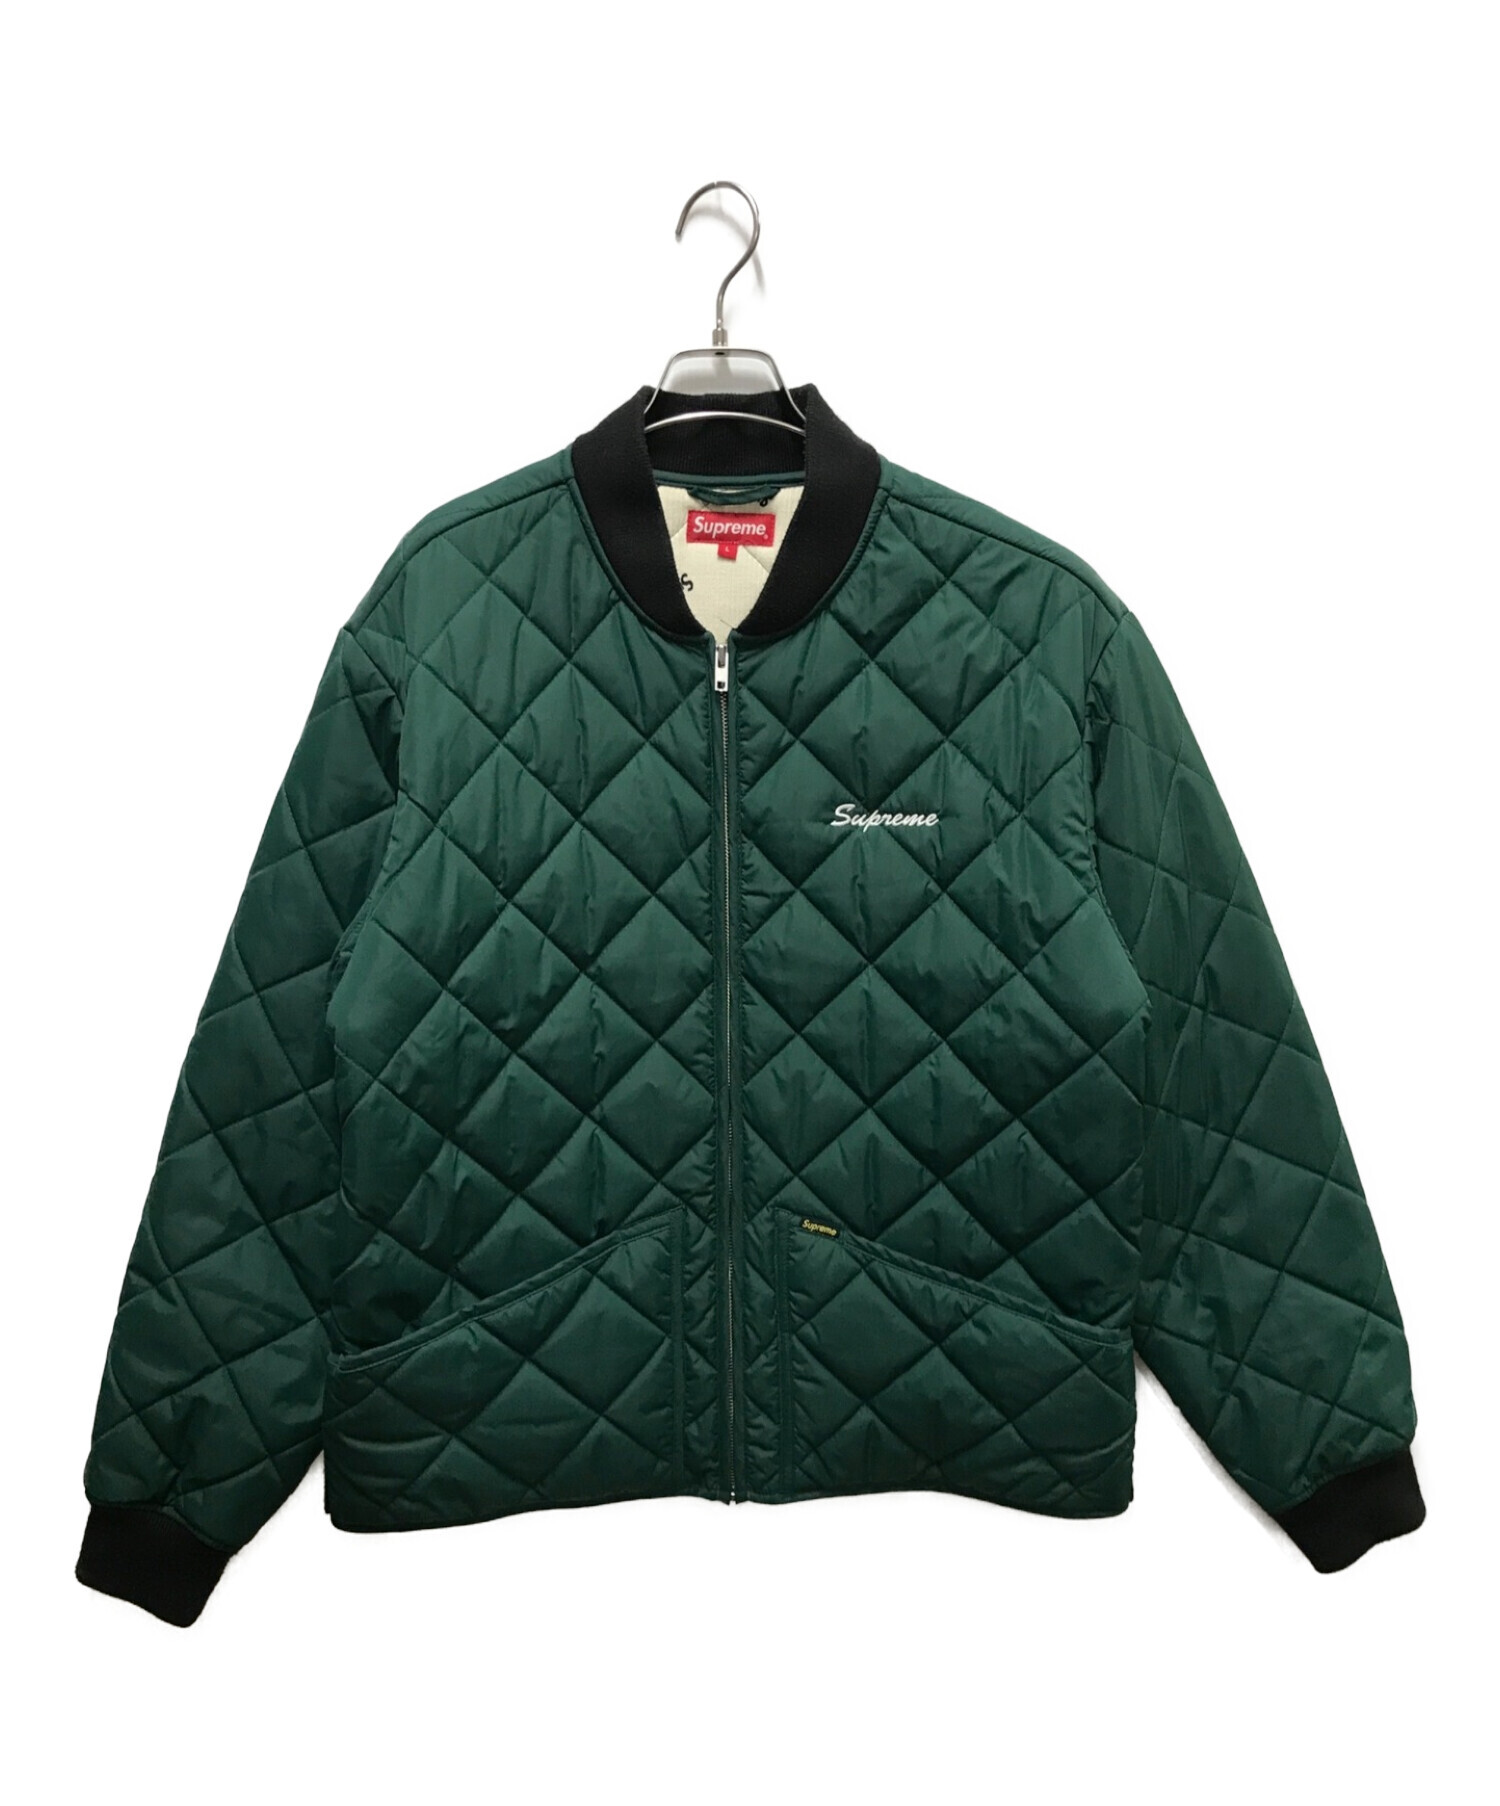 L・Supreme dead prez Quilted Work Jacket - ブルゾン